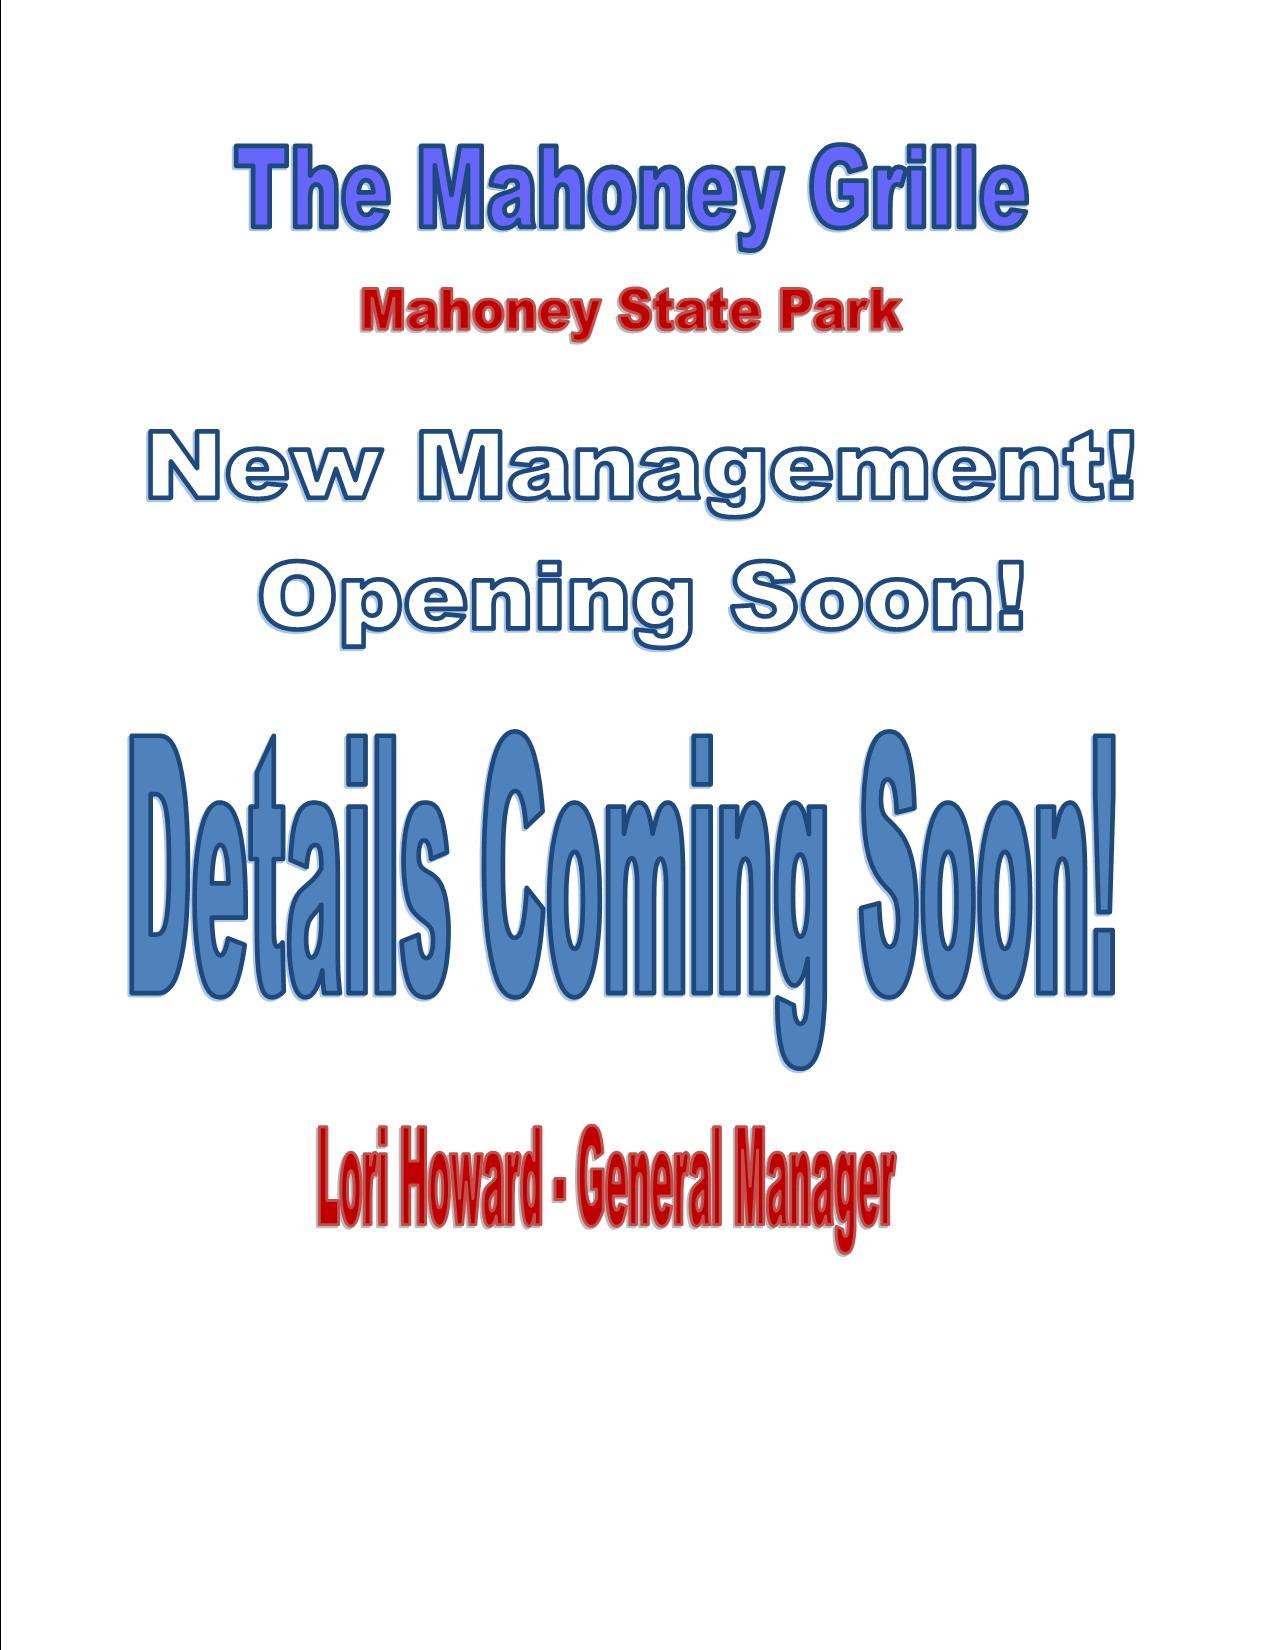 Mahoney Grille_Opening_soon